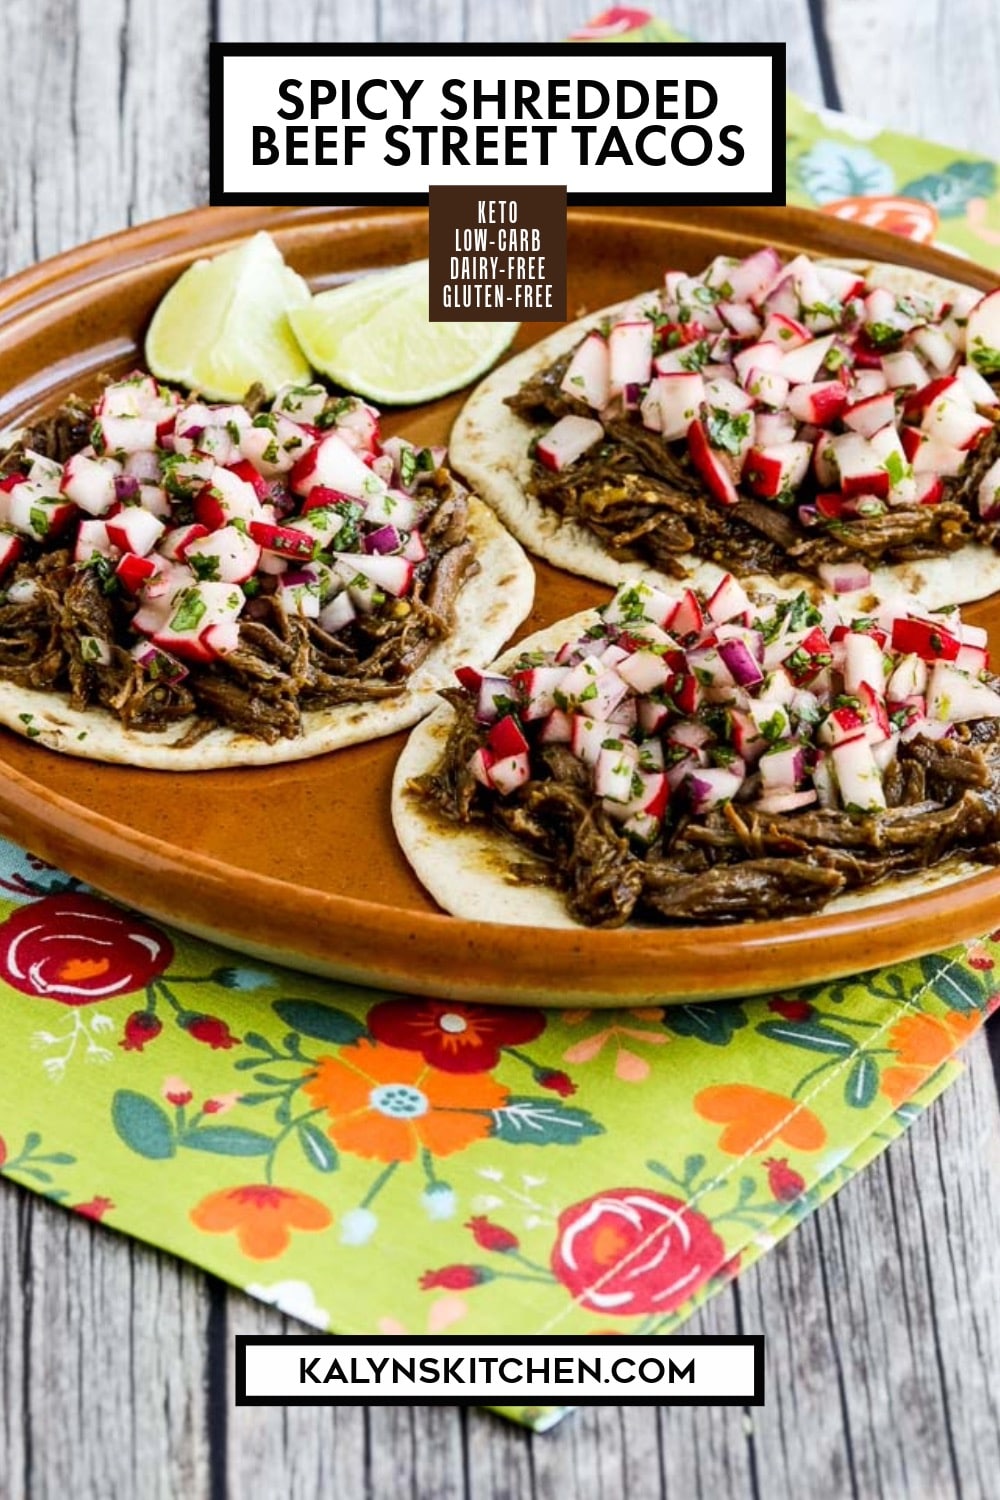 Pinterest image of Spicy Shredded Beef Street Tacos